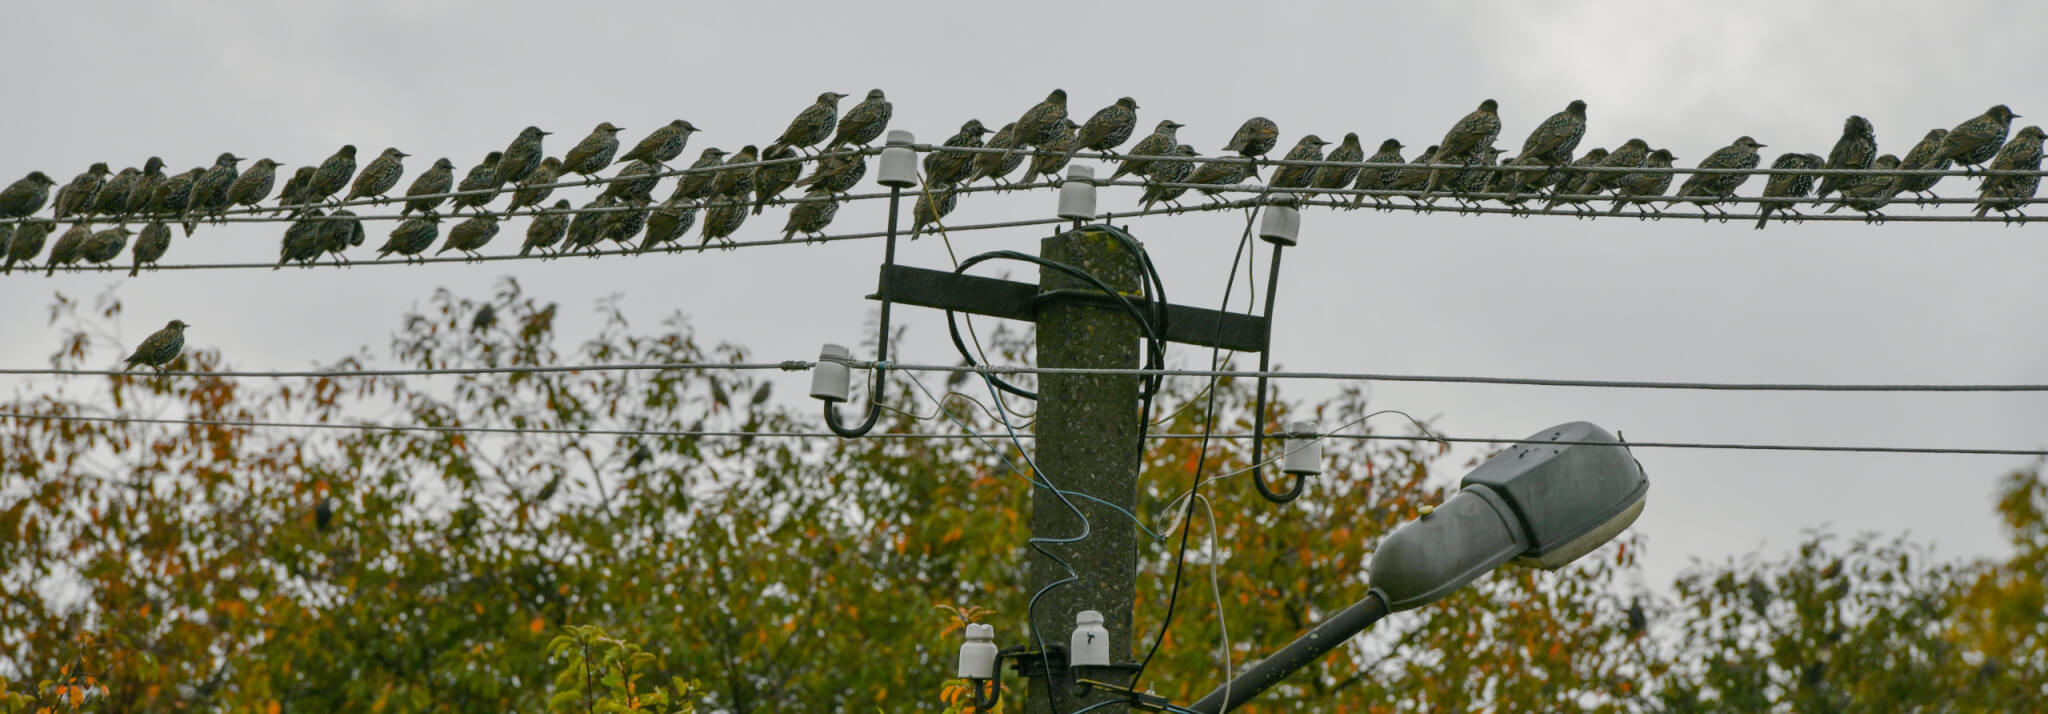 Starling on a power line